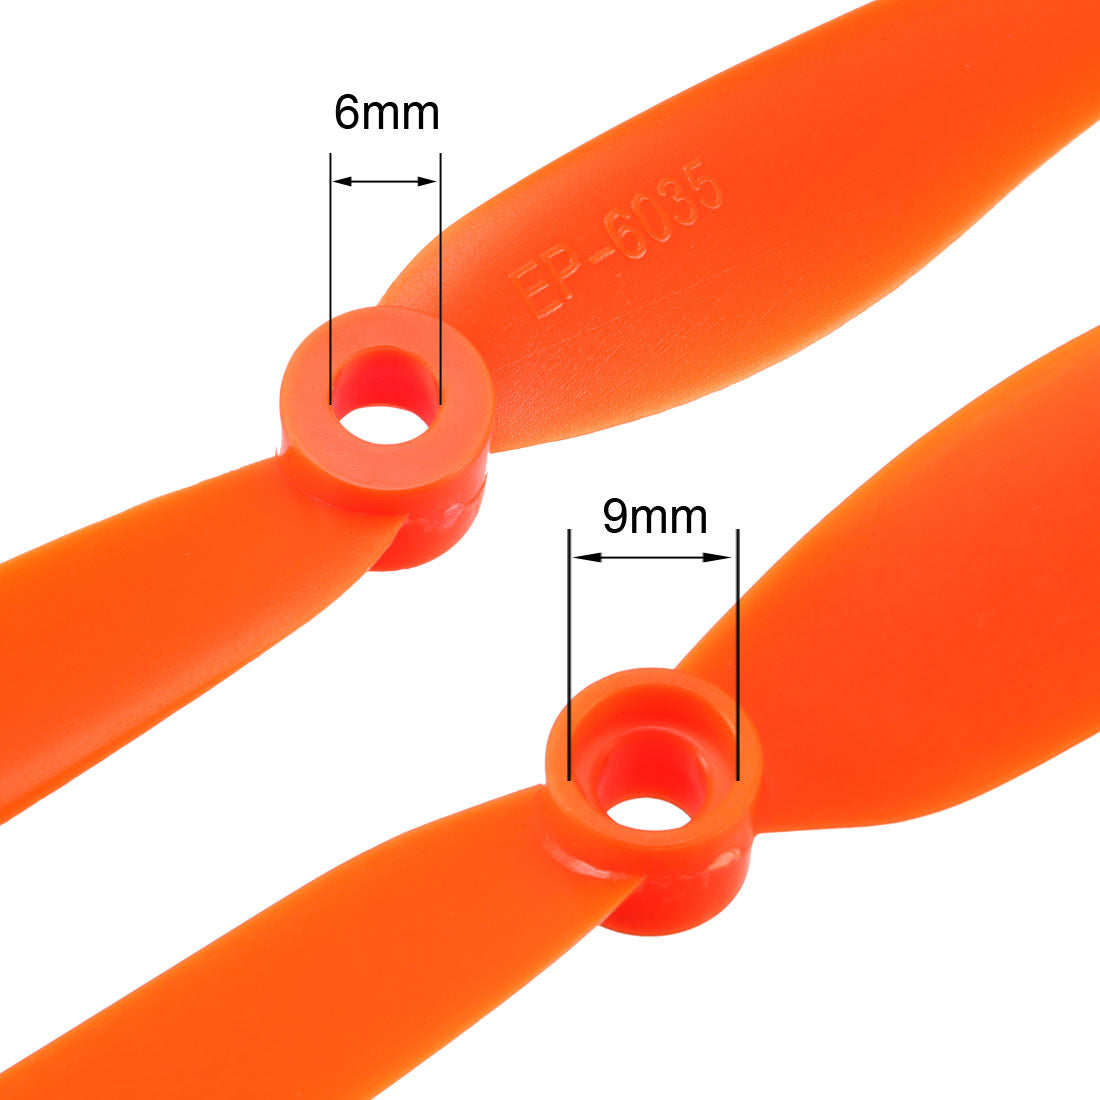 uxcell Uxcell RC Propellers  6035 6x3.5 Inch 2-Vane Fixed-Wing for Airplane Toy, Nylon Orange 4pcs with Adapter Rings